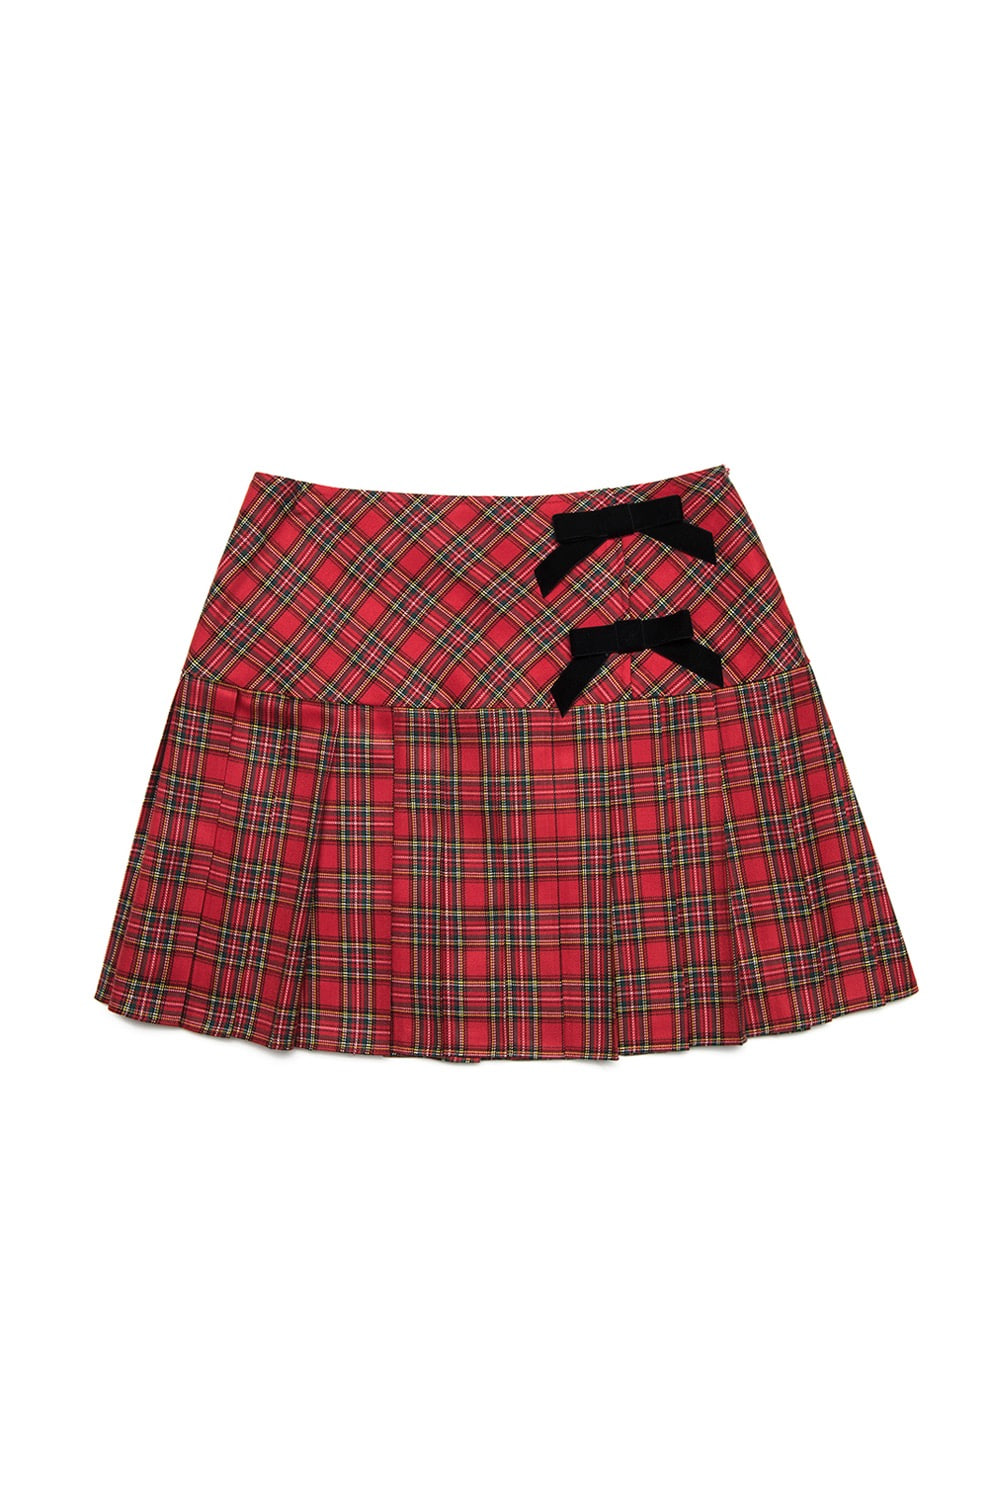 Alicia check skirt(red)